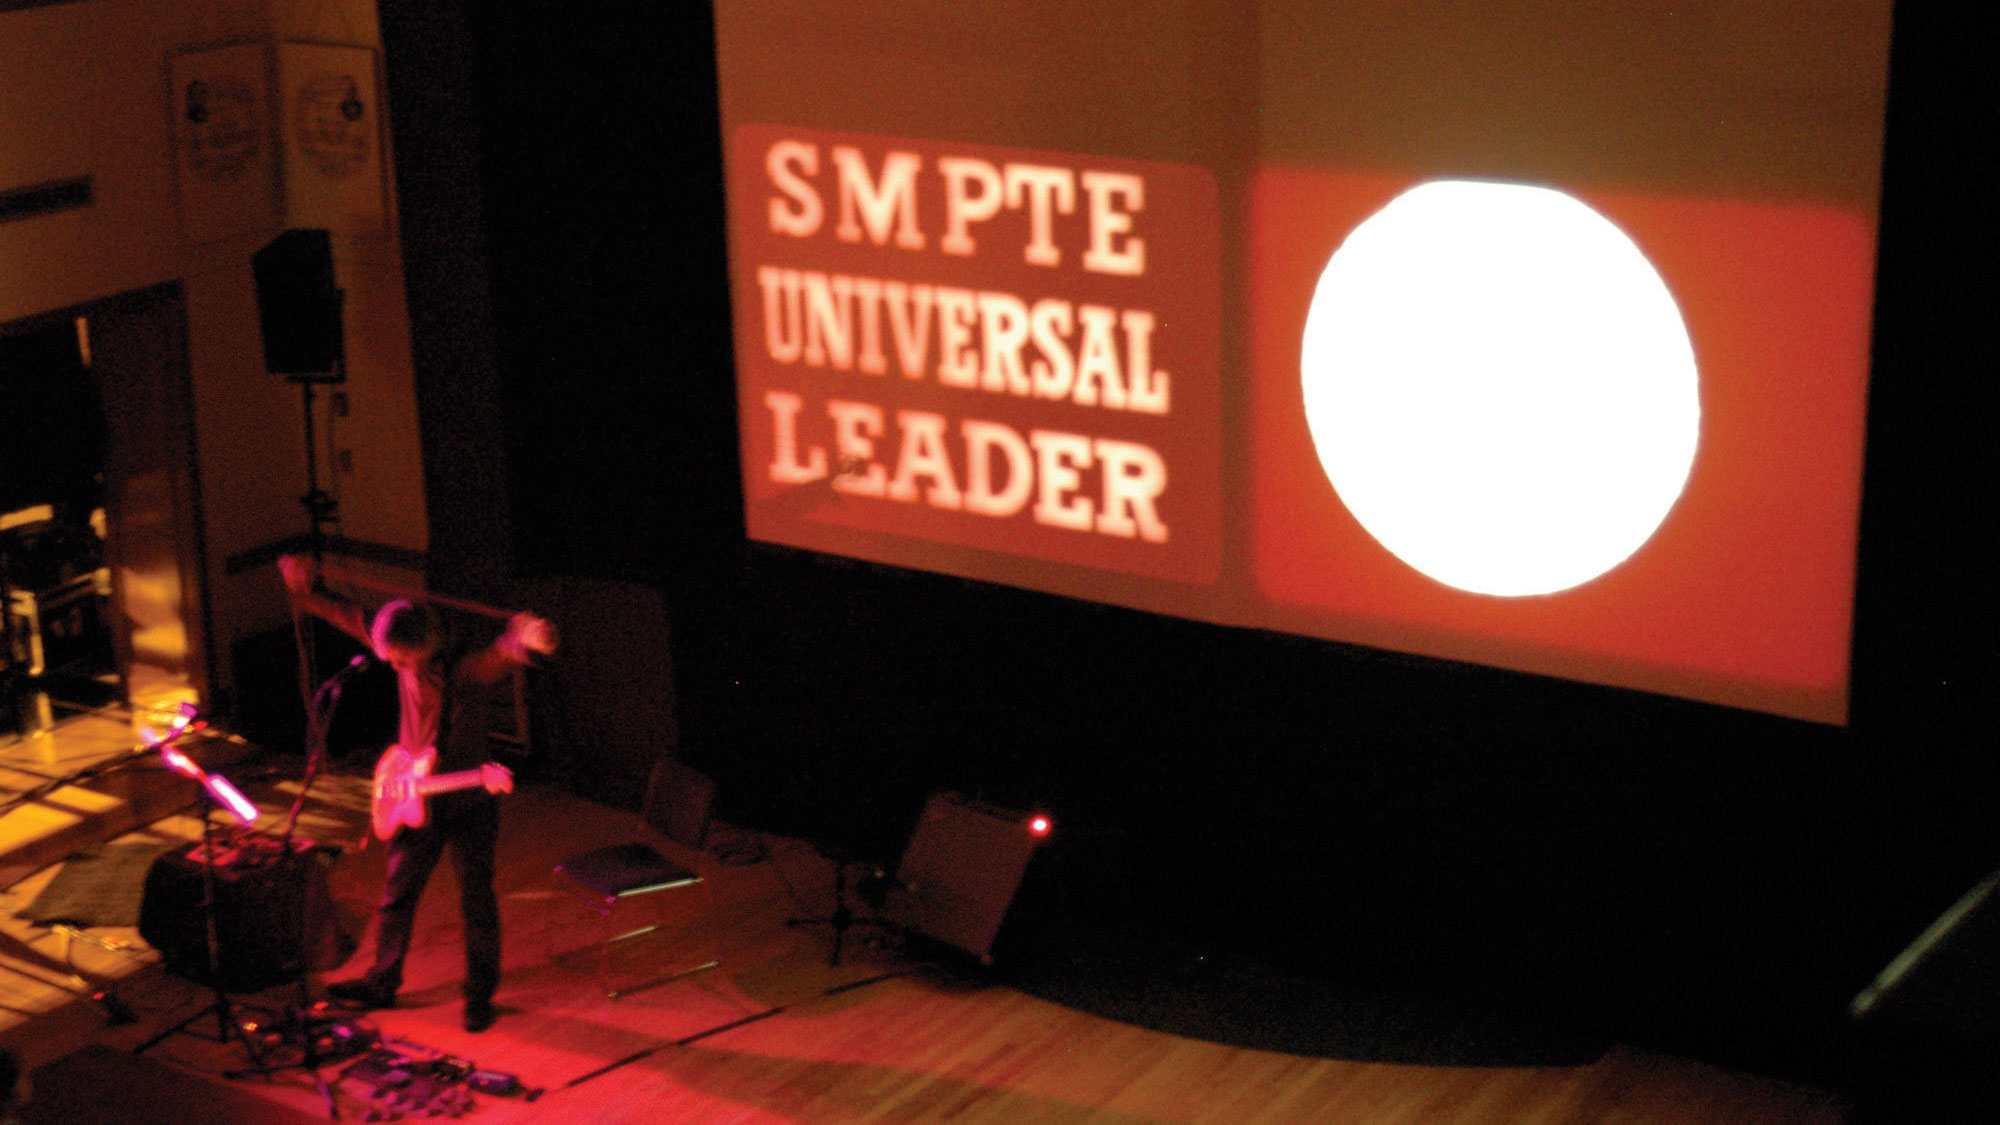 A musician standing with arms up on a small stage lit in red light in front of a projection reading "S M P T E Universal Leader" 